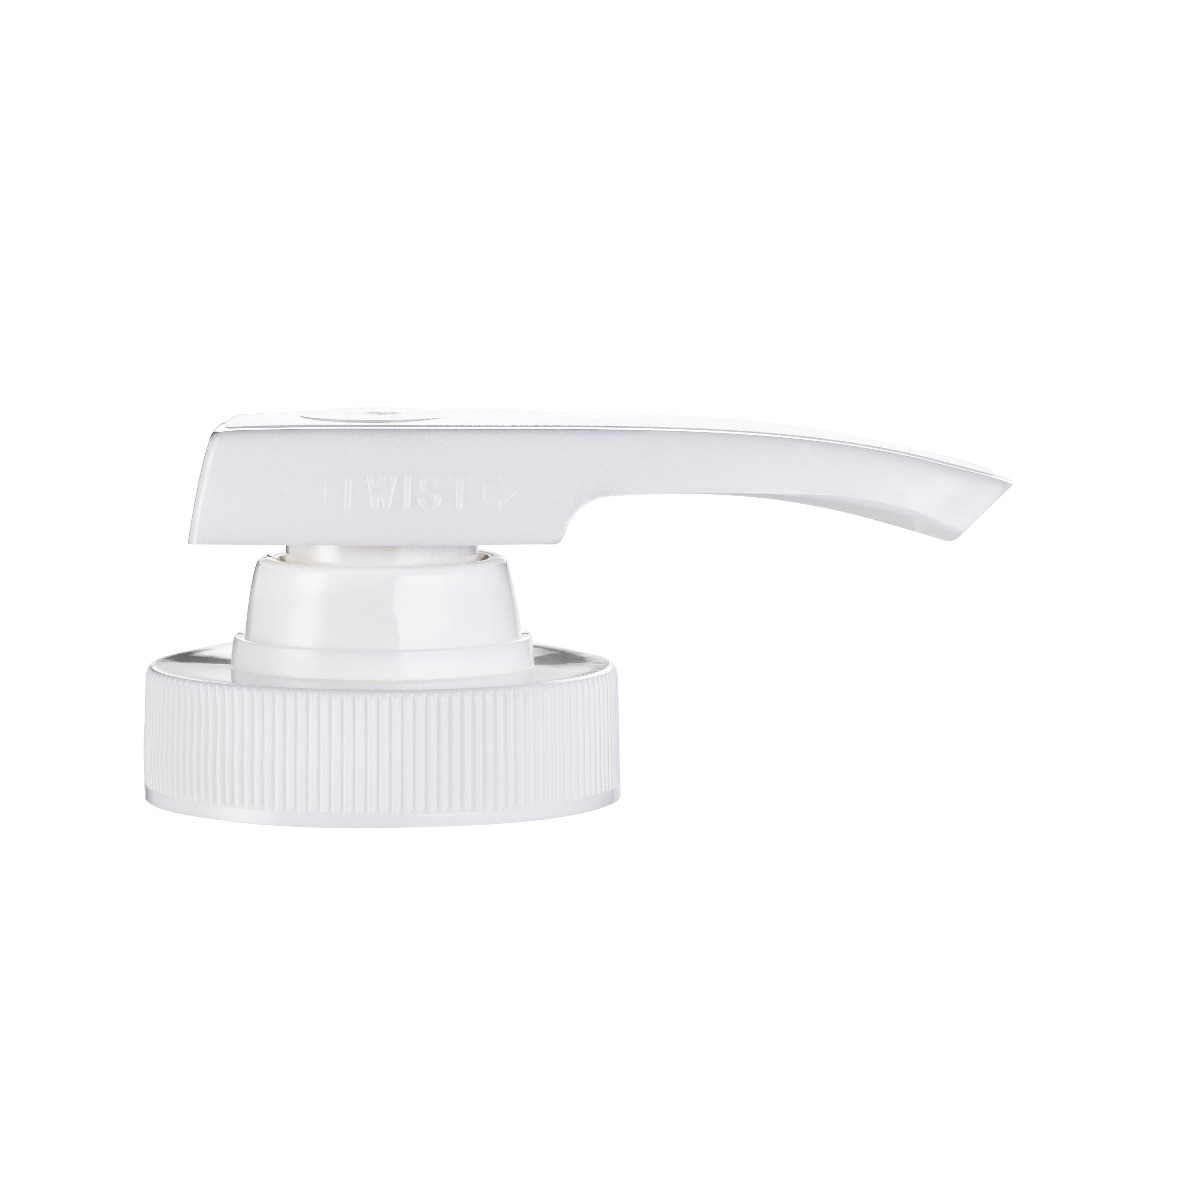 Short white container lid with Dispensing spout